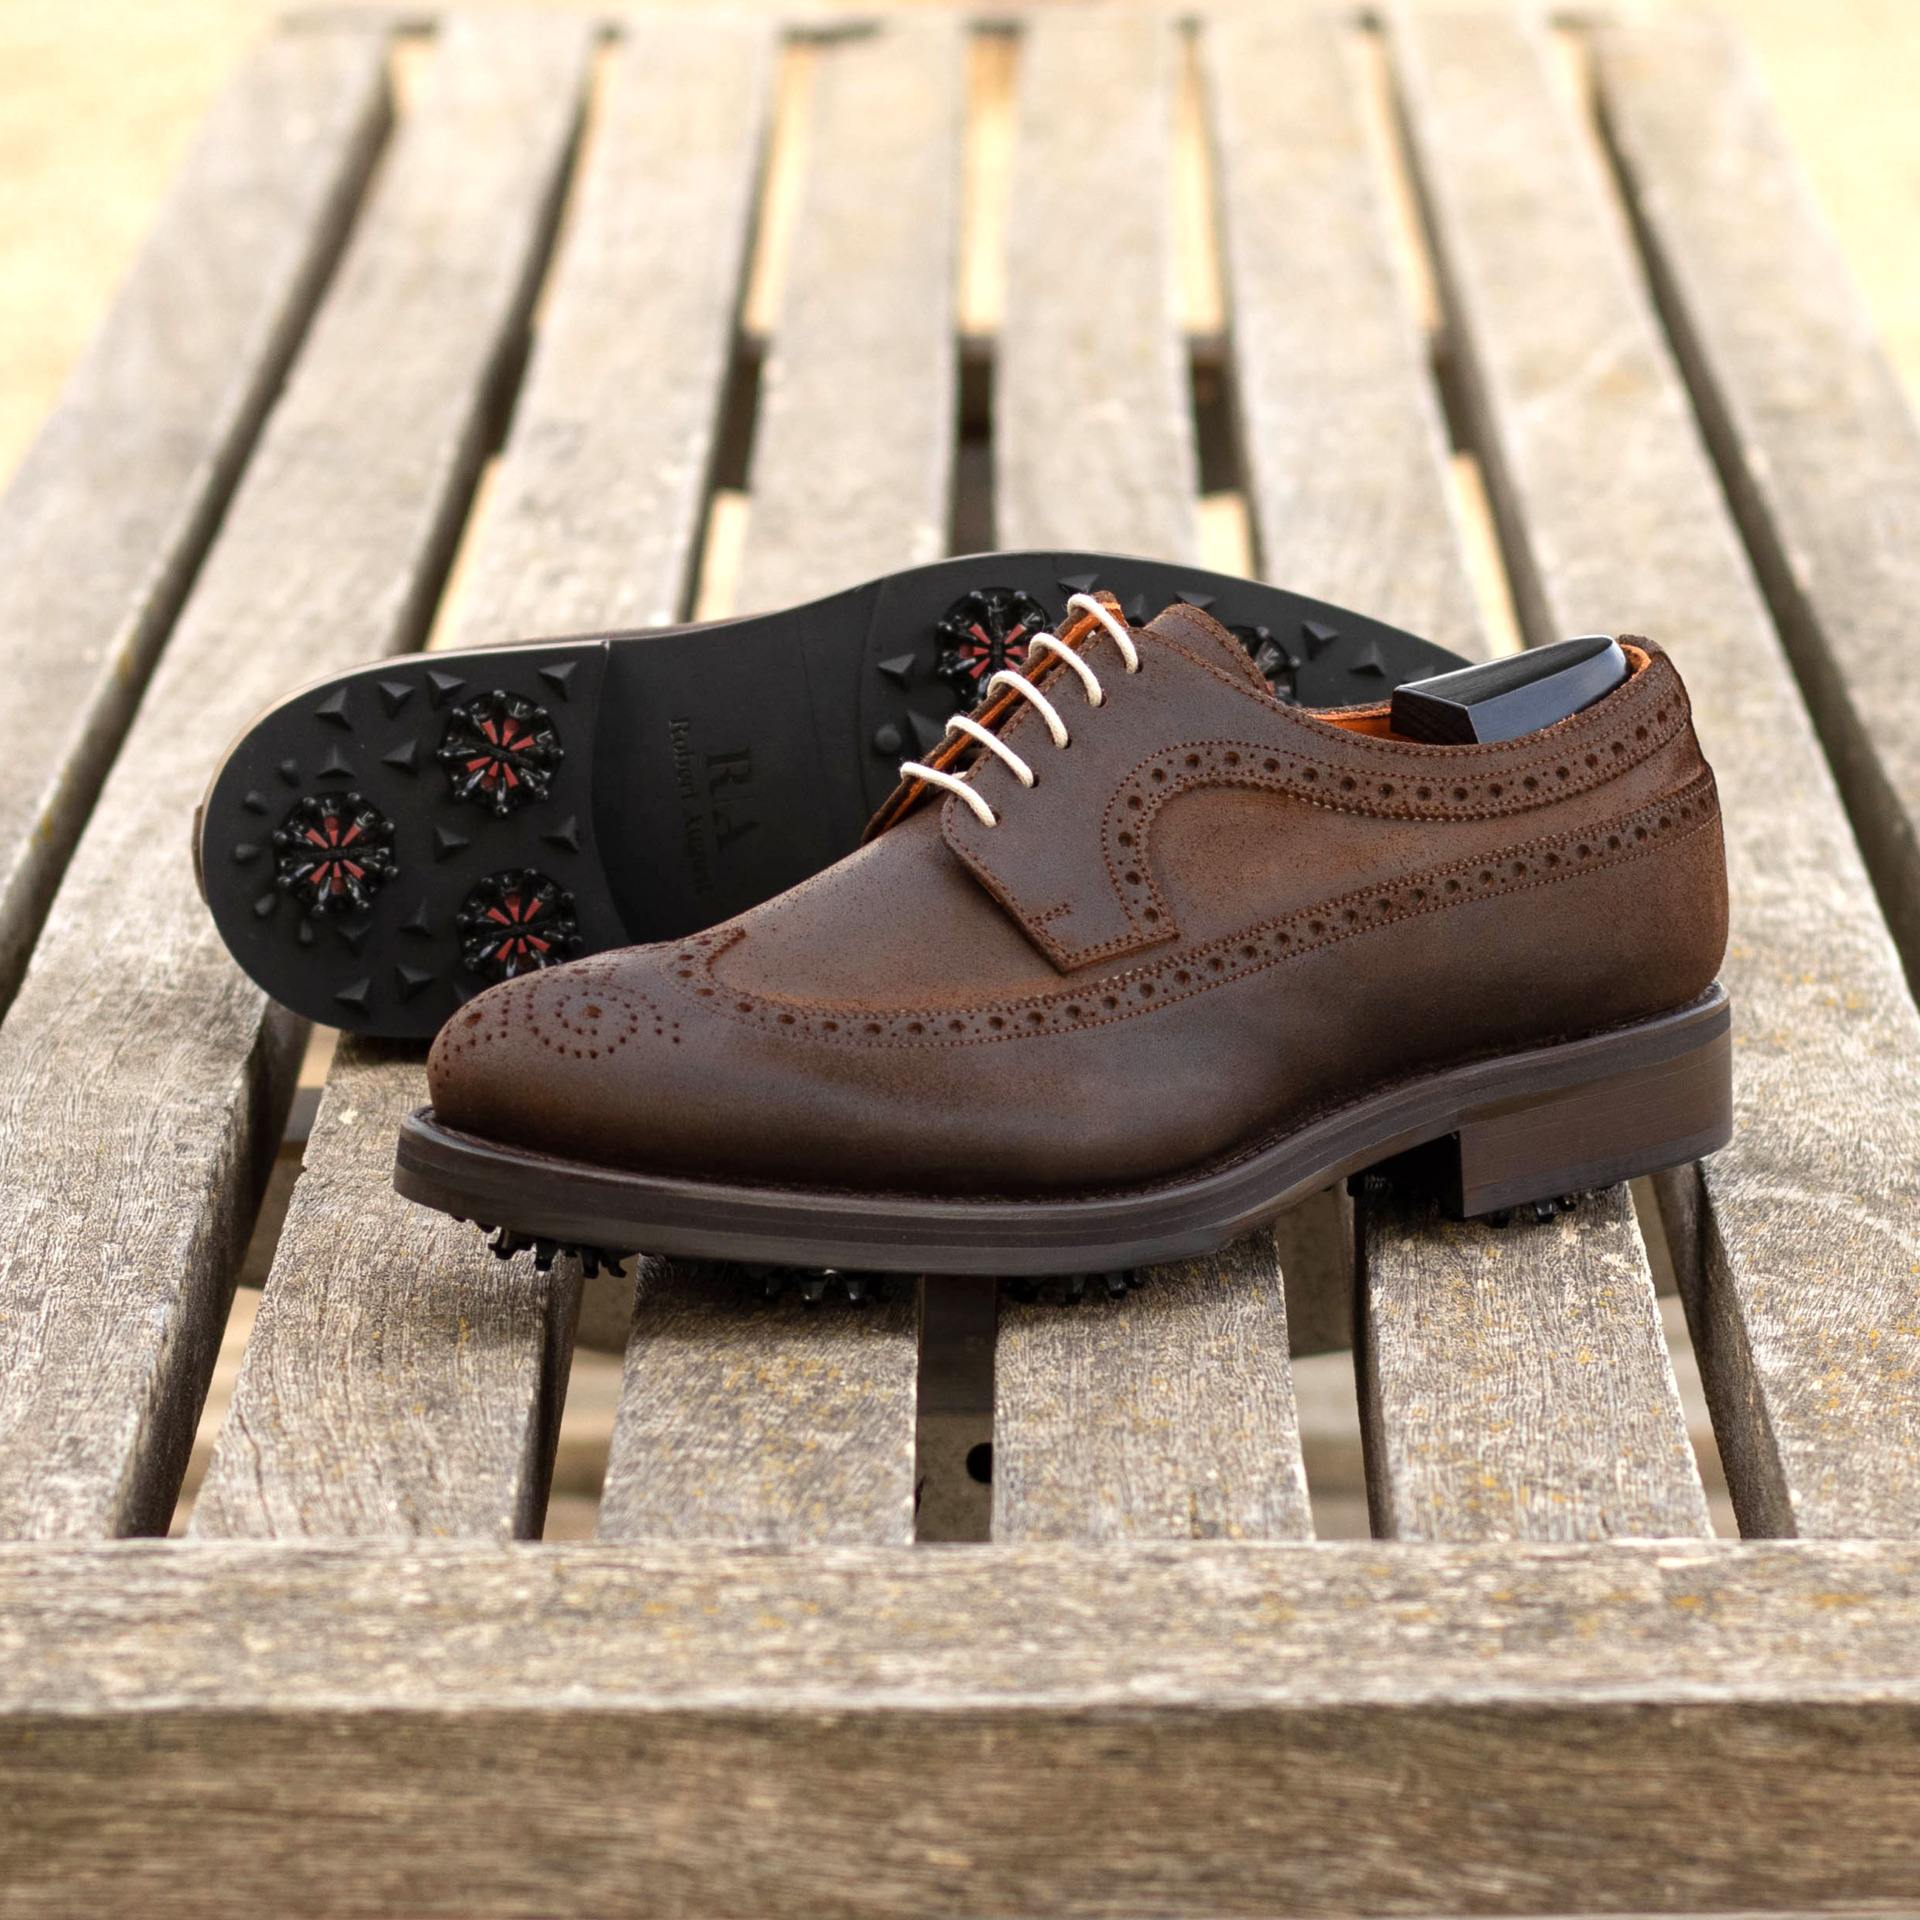 Introducing the Elston Ave. Longwing Blucher No. 8215: Handcrafted Men's Golf Shoes Redefining Style and Performance